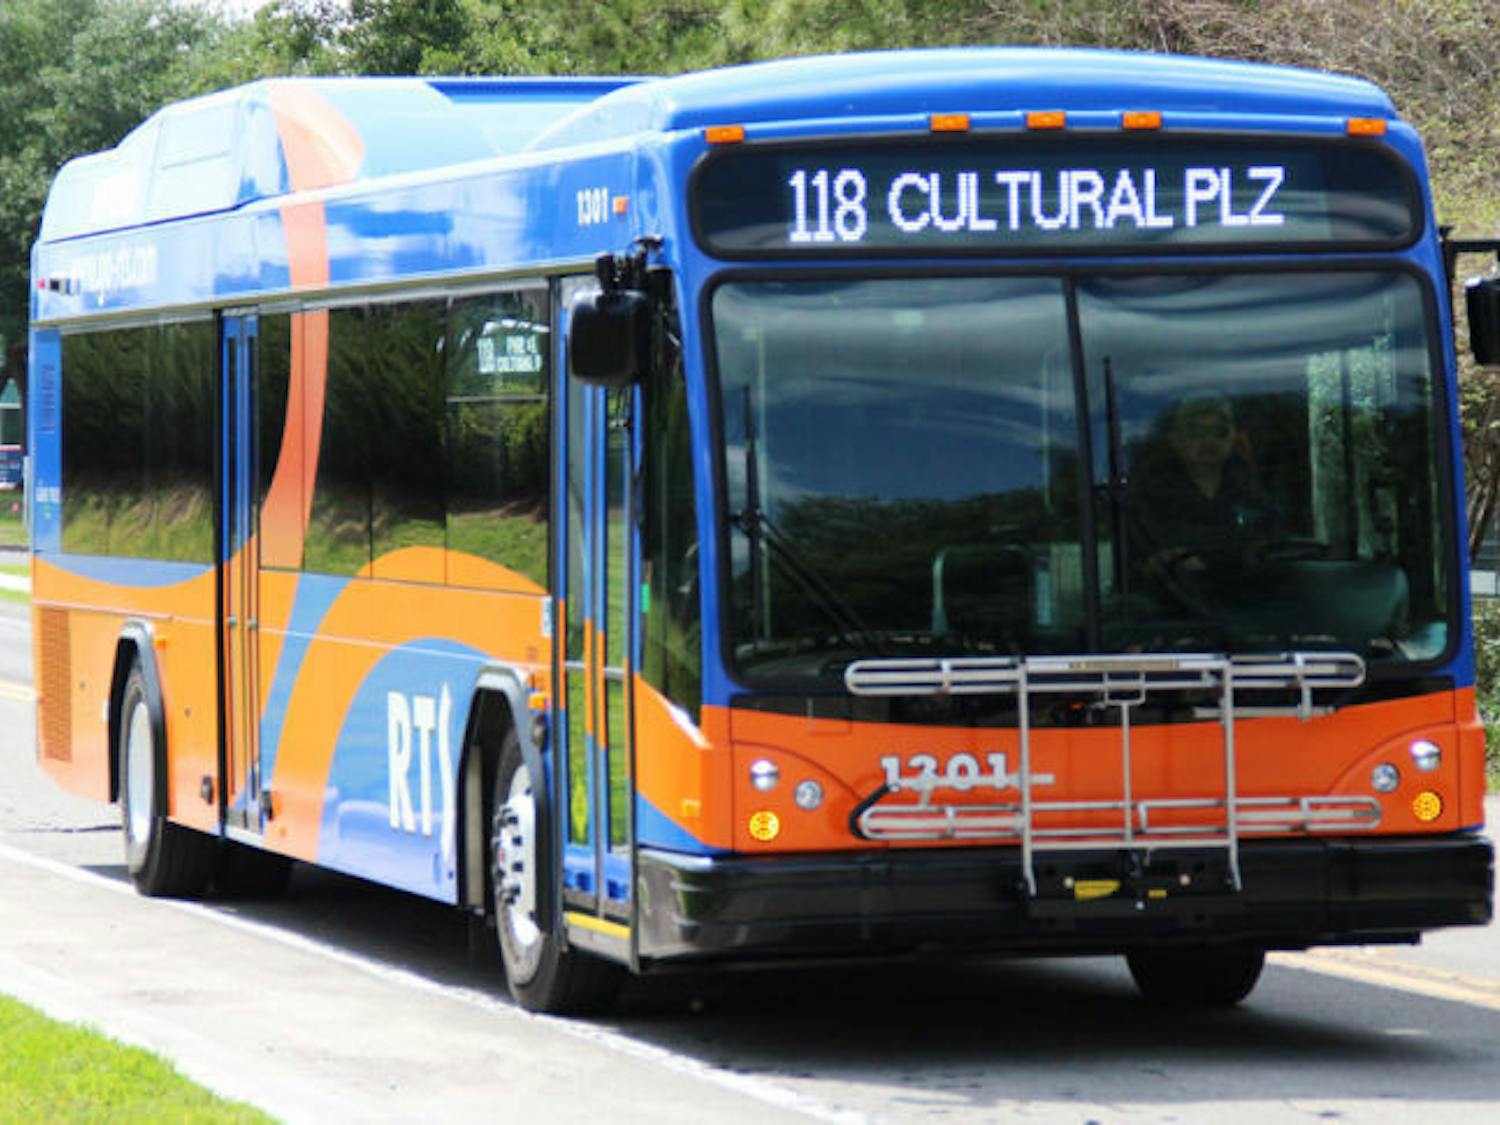 RTS welcomed three new hybrid buses, including the 118 Park-and-Ride, to campus last week. The hybrid buses cost about $600,000 each, said RTS spokesman Chip Skinner.